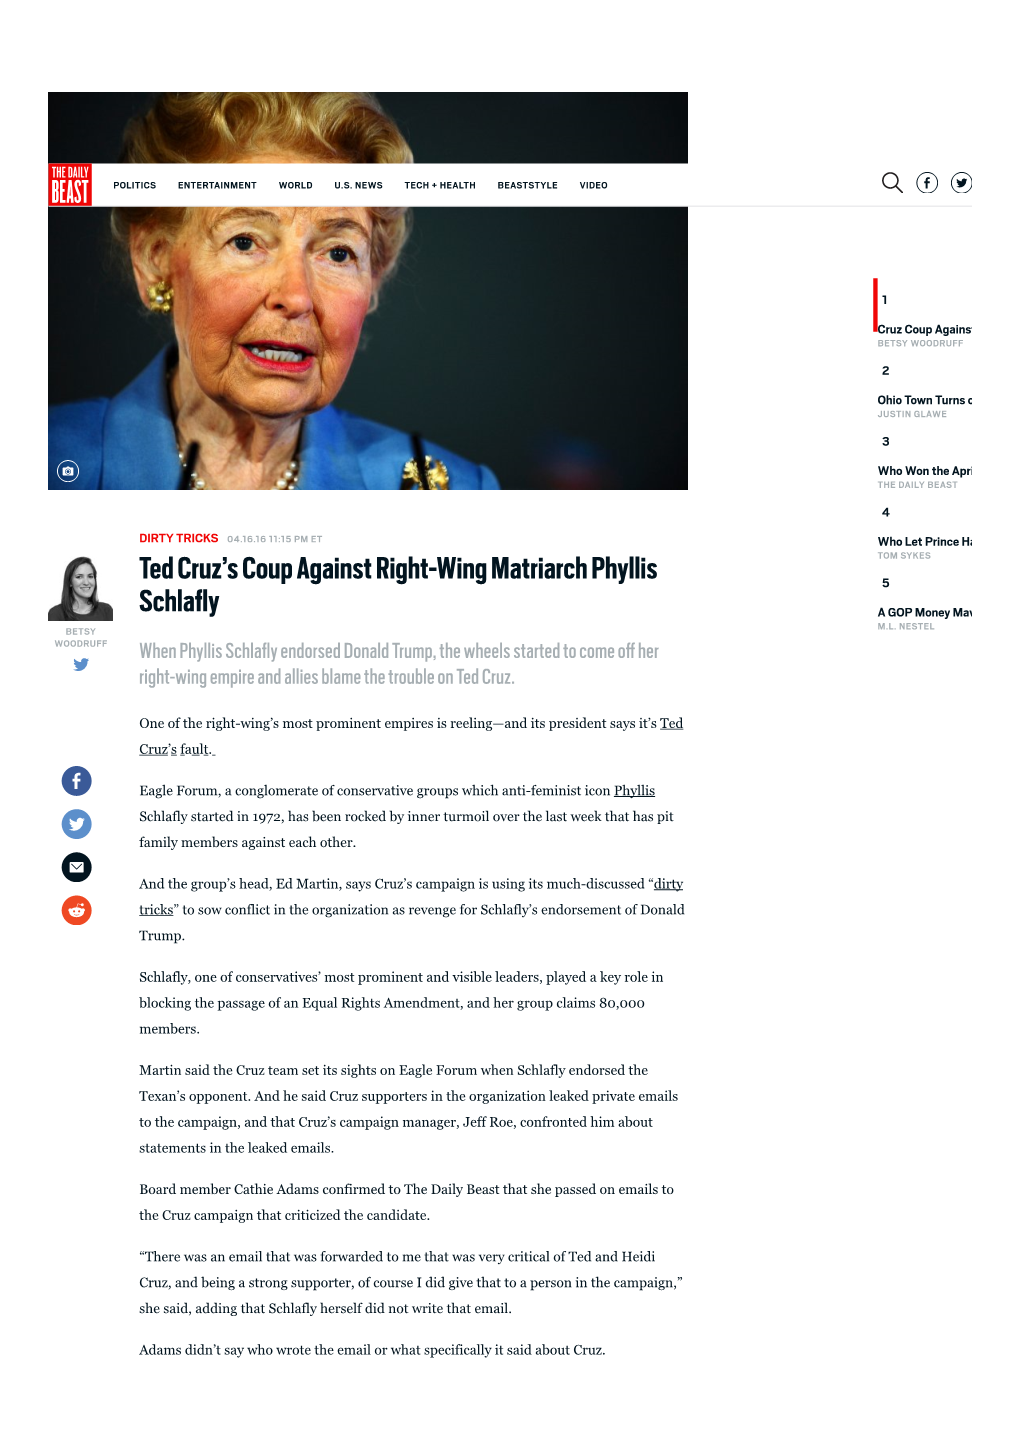 Ted Cruz's Coup Against Right‐Wing Matriarch Phyllis Schlafly